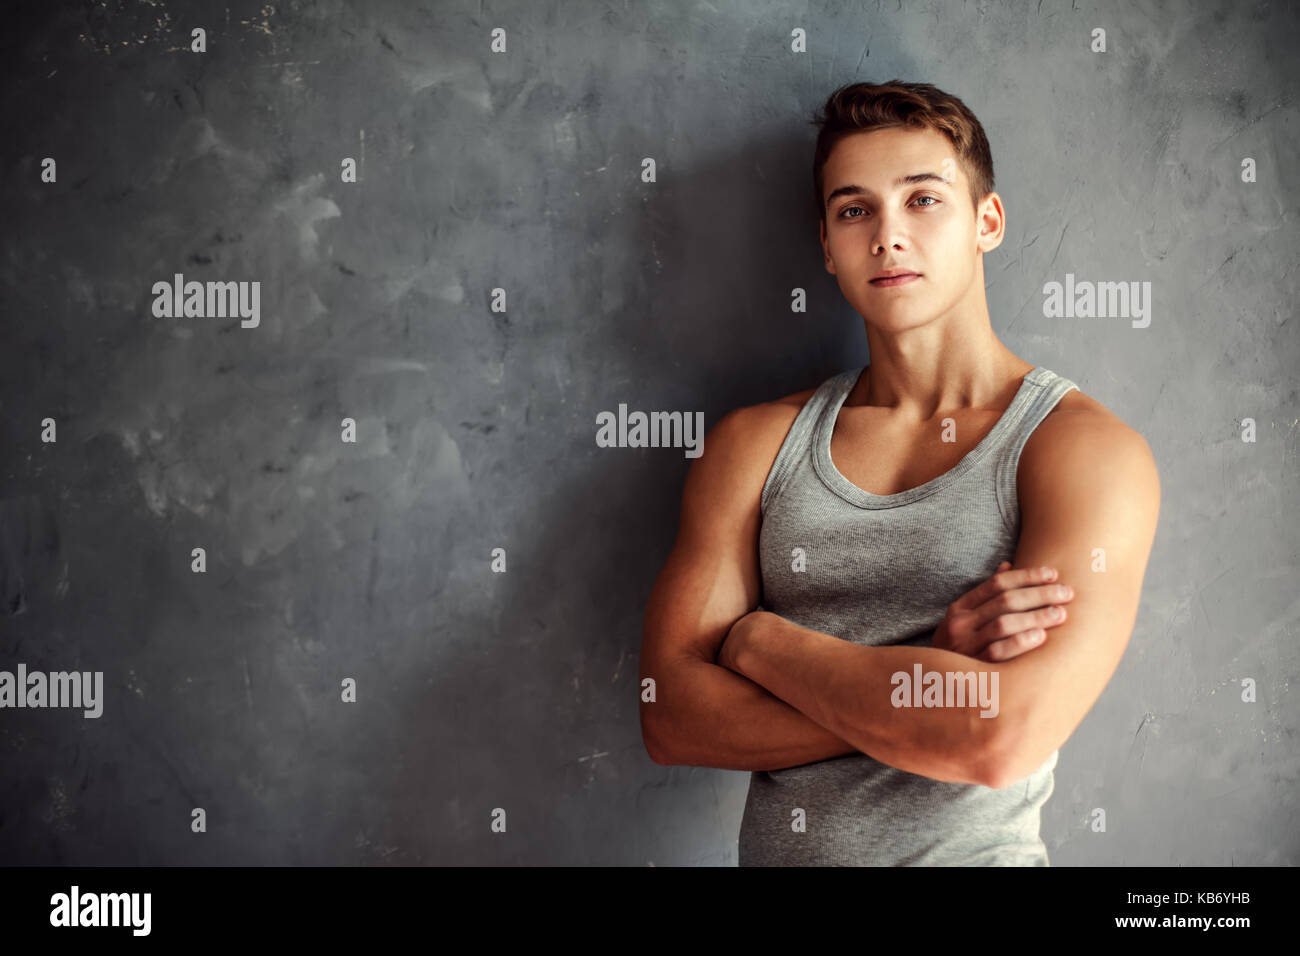 Portrait of muscular young handsome man wearing a gray undershirt standing with hands folded against gray textured wall Stock Photo